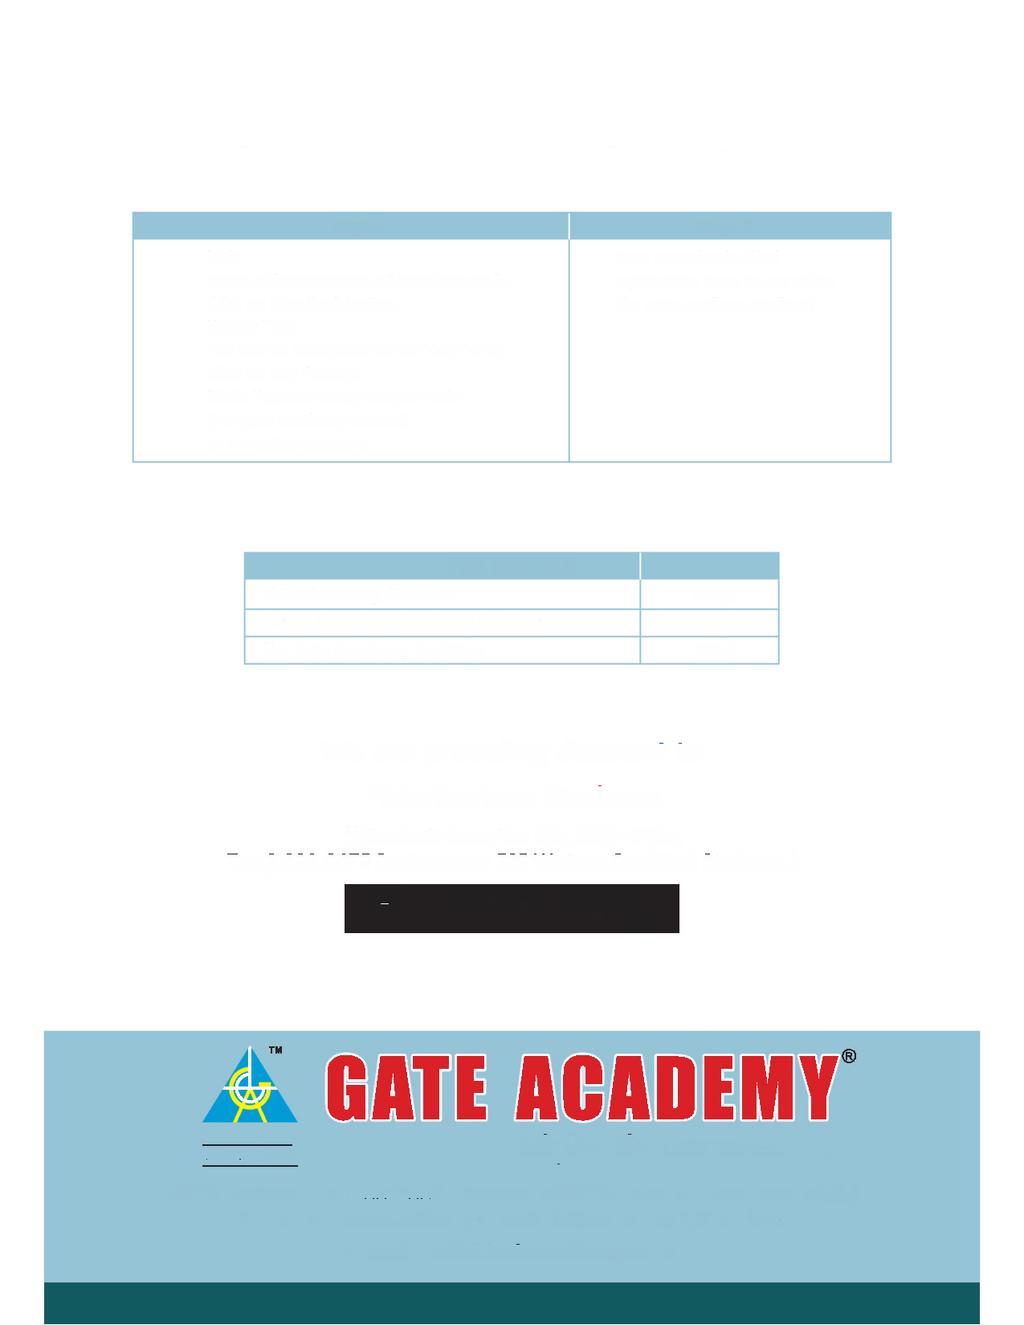 Finally... How to get registered for Test Series? Step -1 Visit www.onlinetestseries.gateacademy.co.